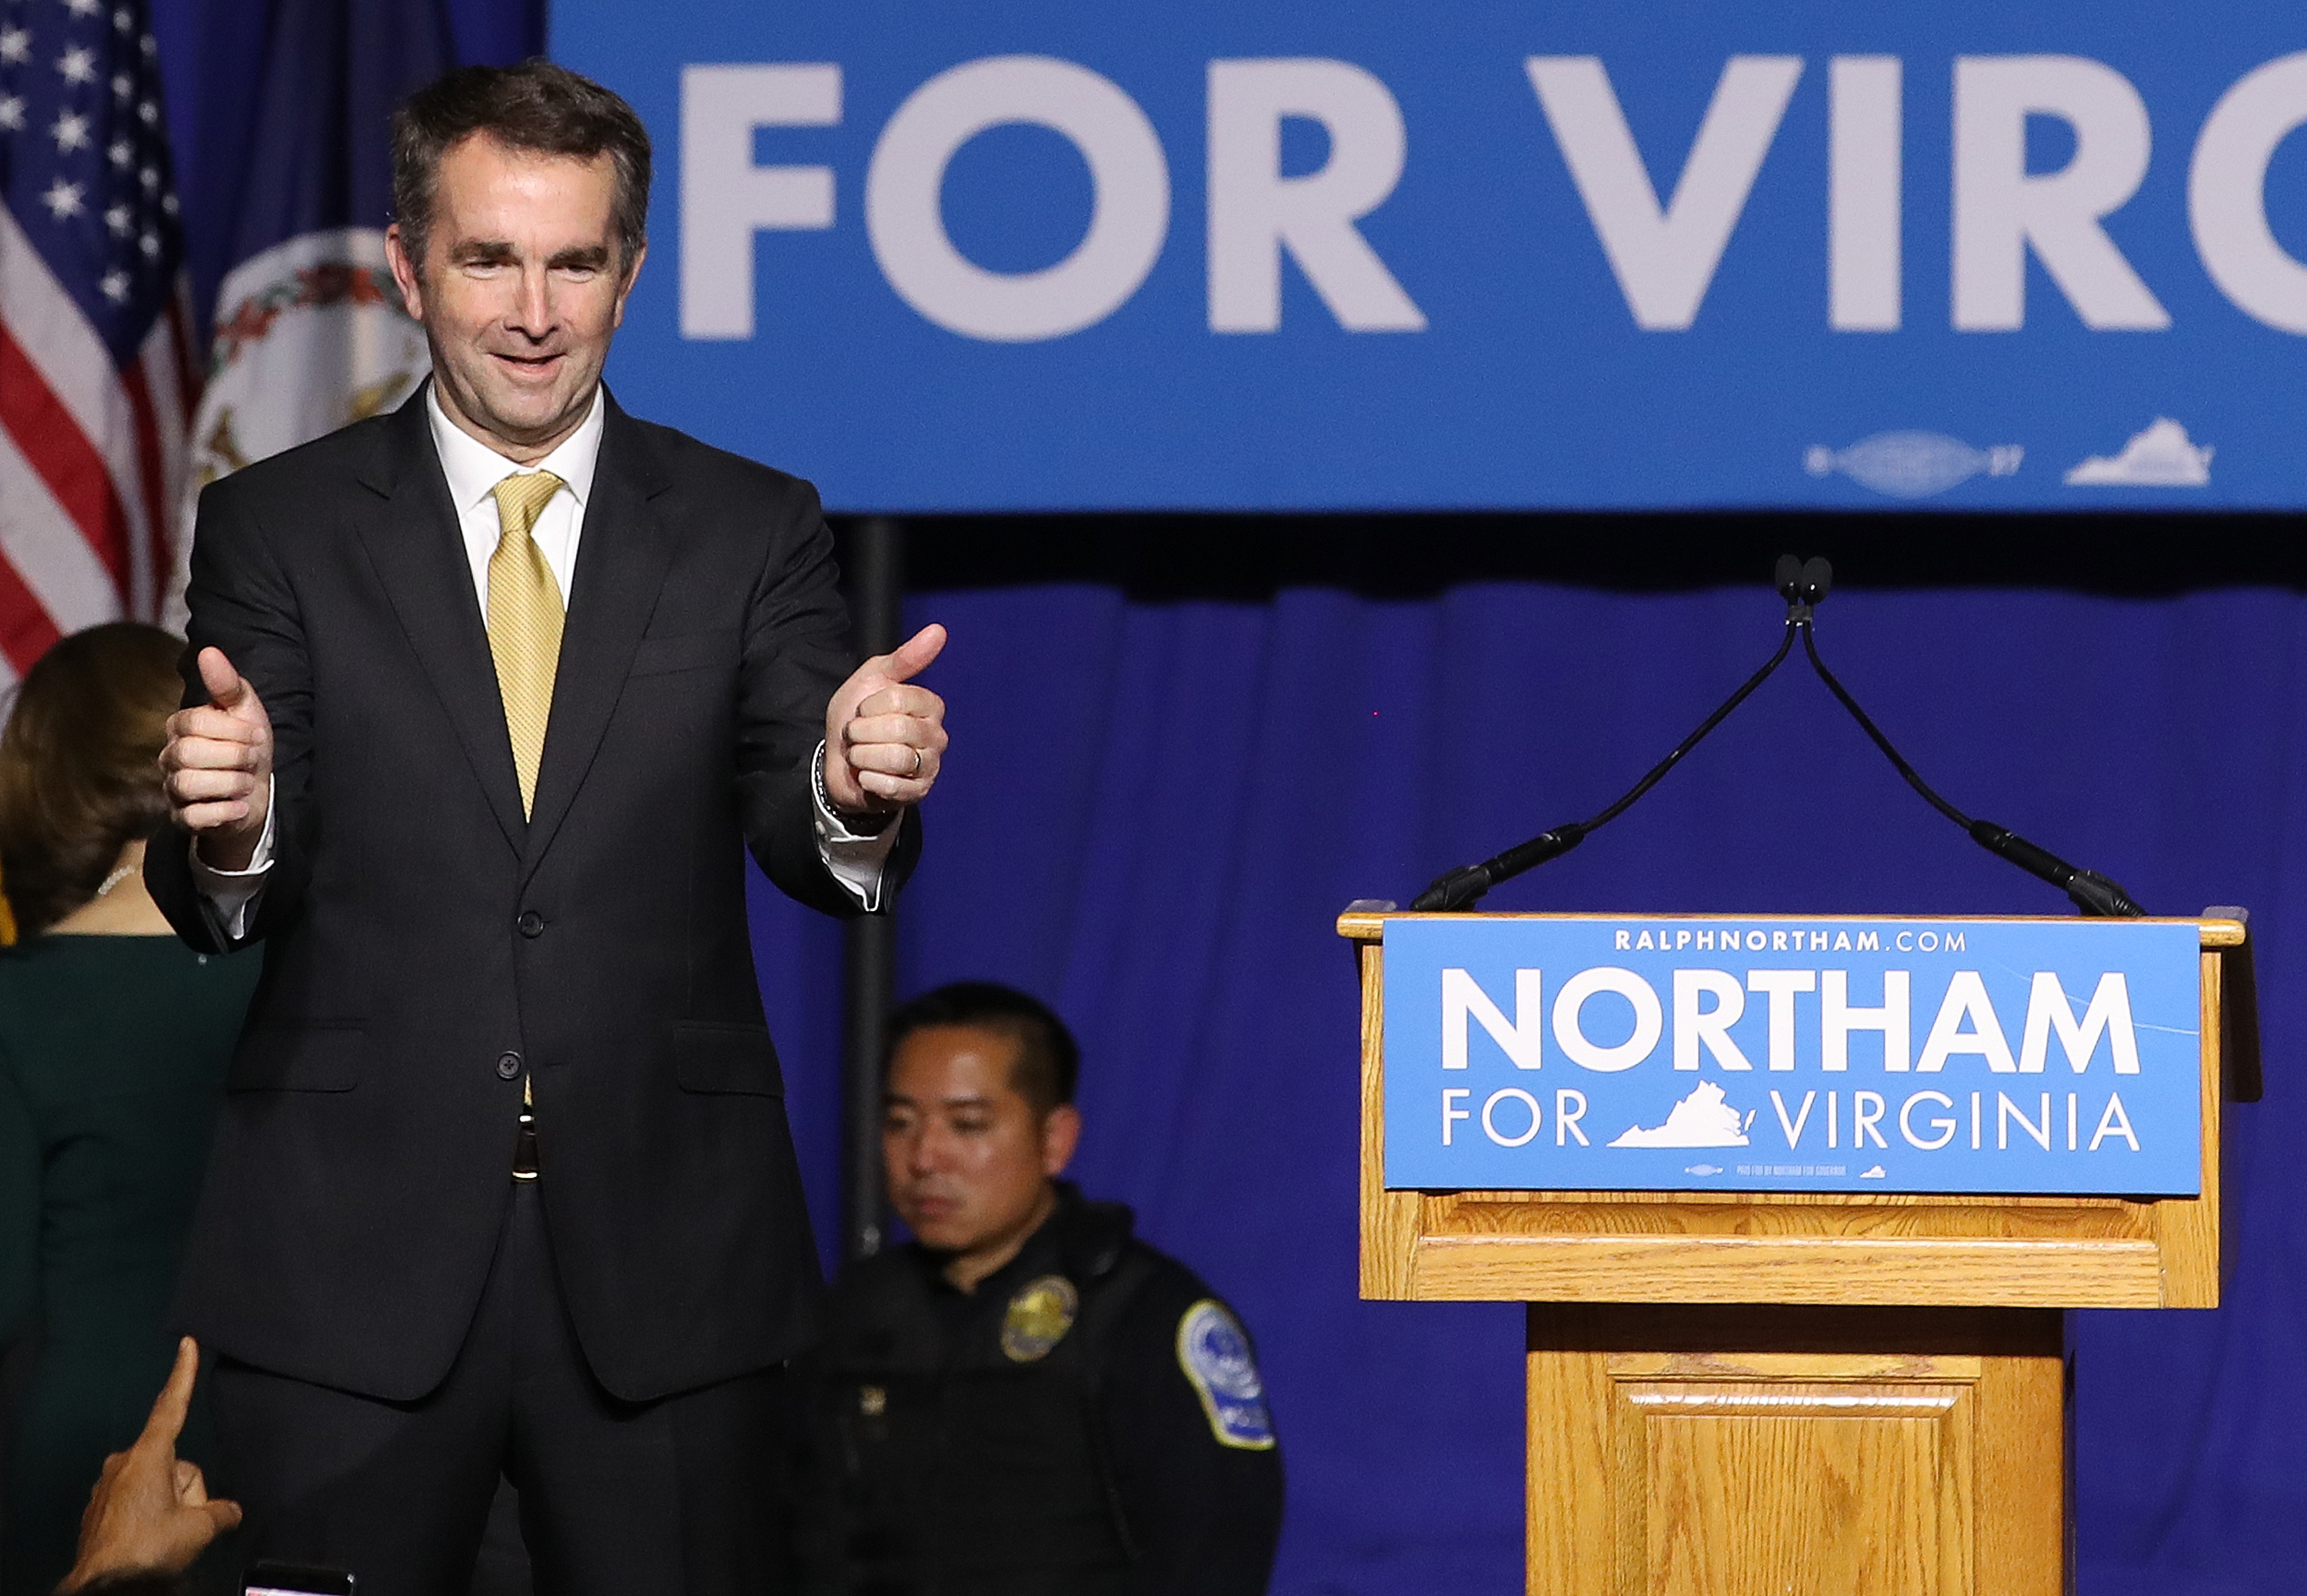 Ralph Northam gives thumbs up